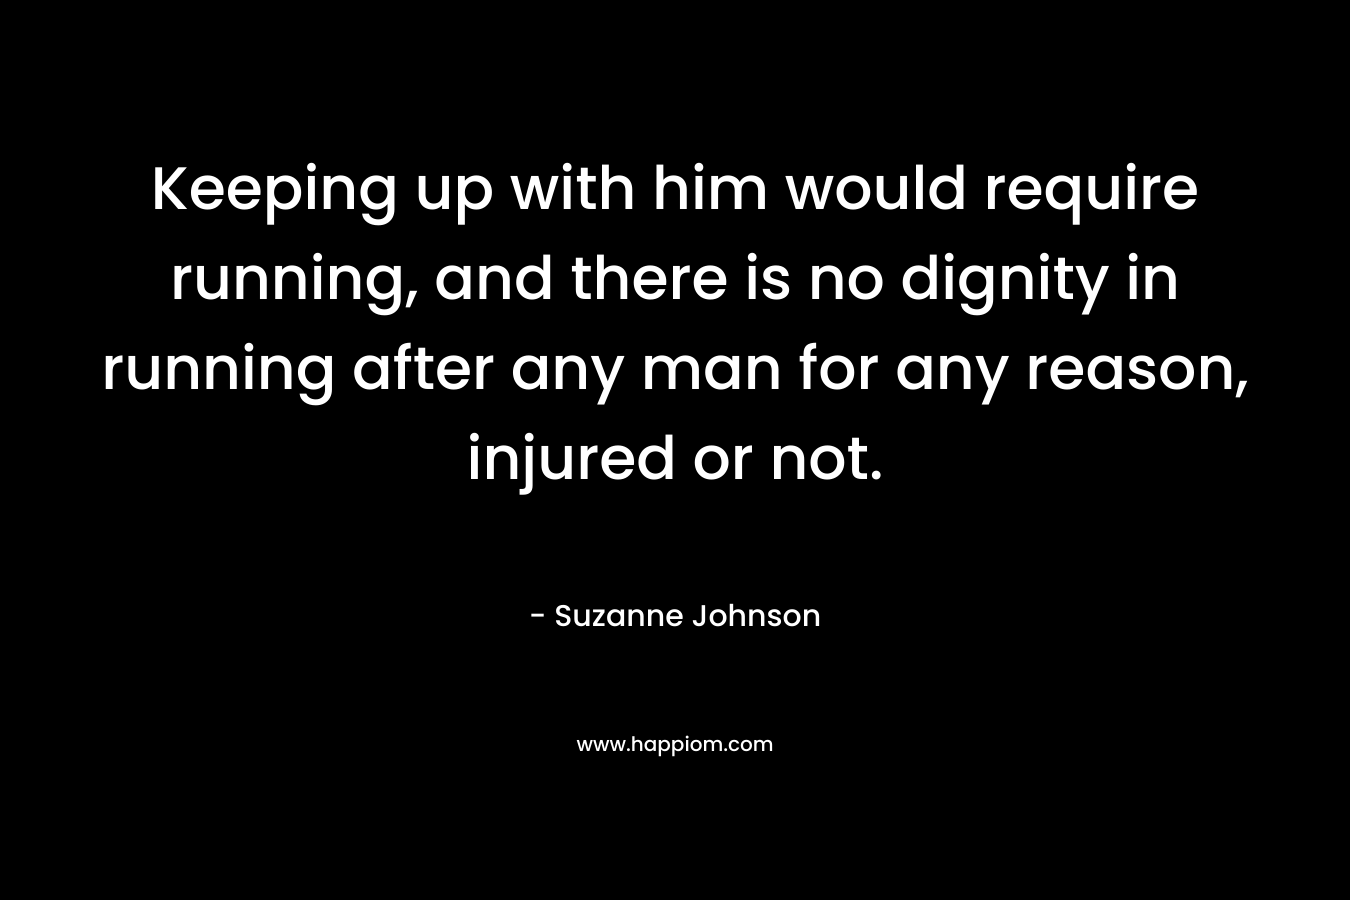 Keeping up with him would require running, and there is no dignity in running after any man for any reason, injured or not. – Suzanne  Johnson